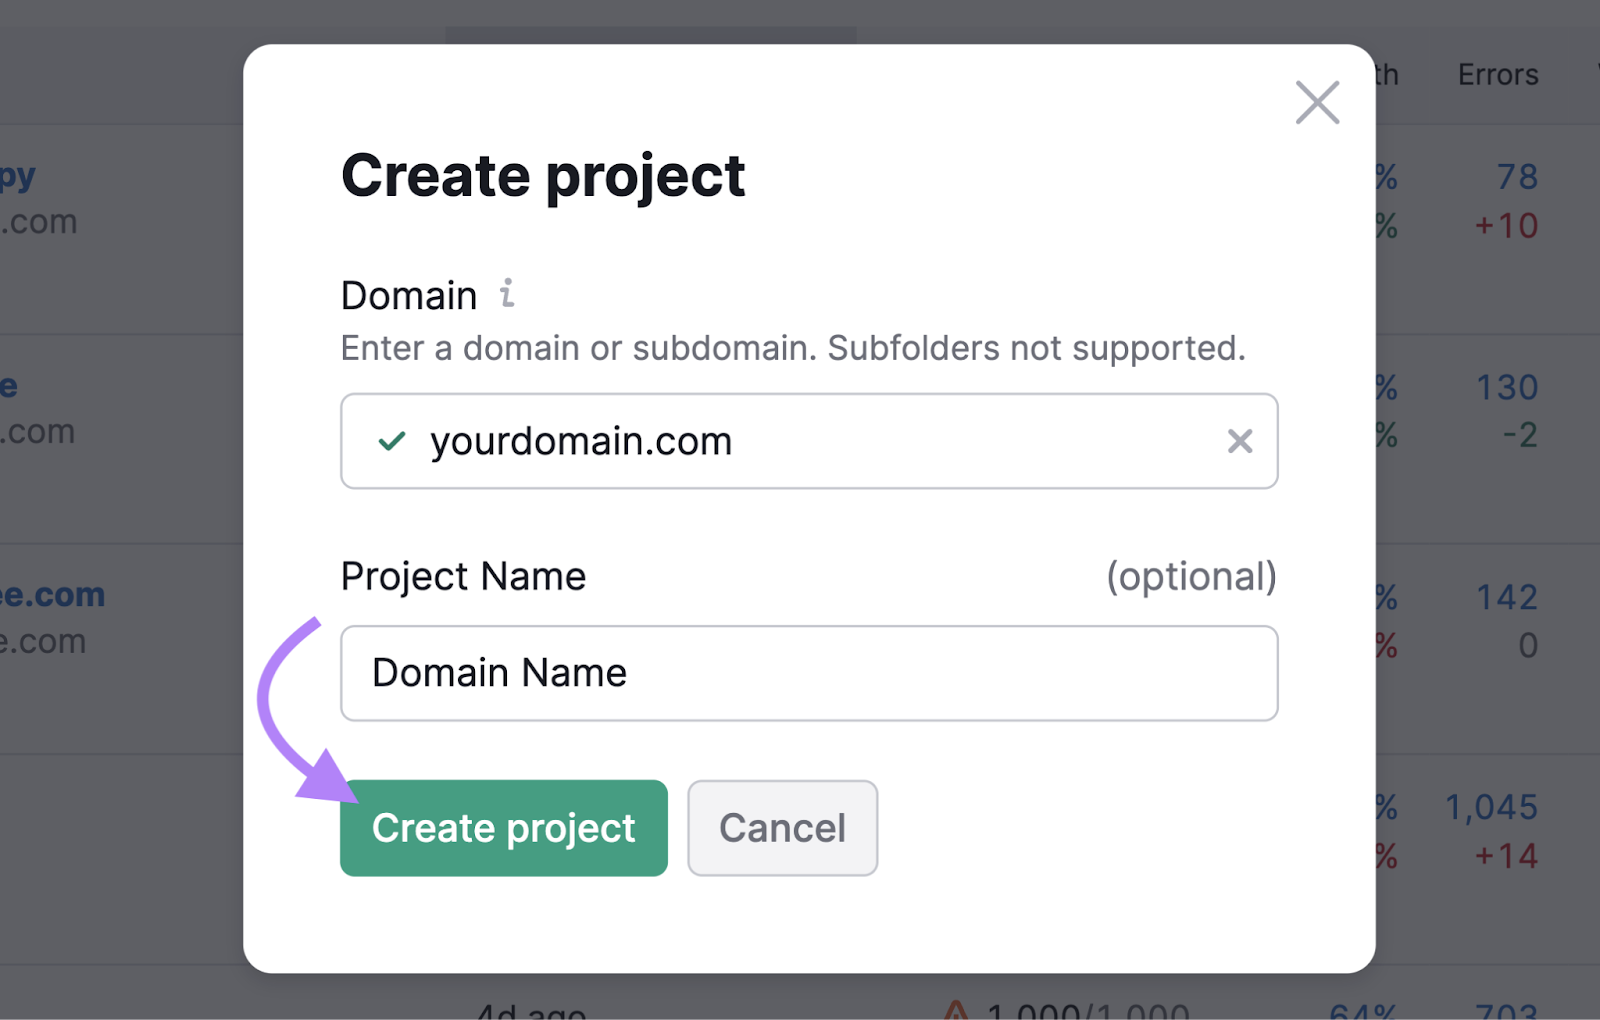 Enter domain and click "Create project"